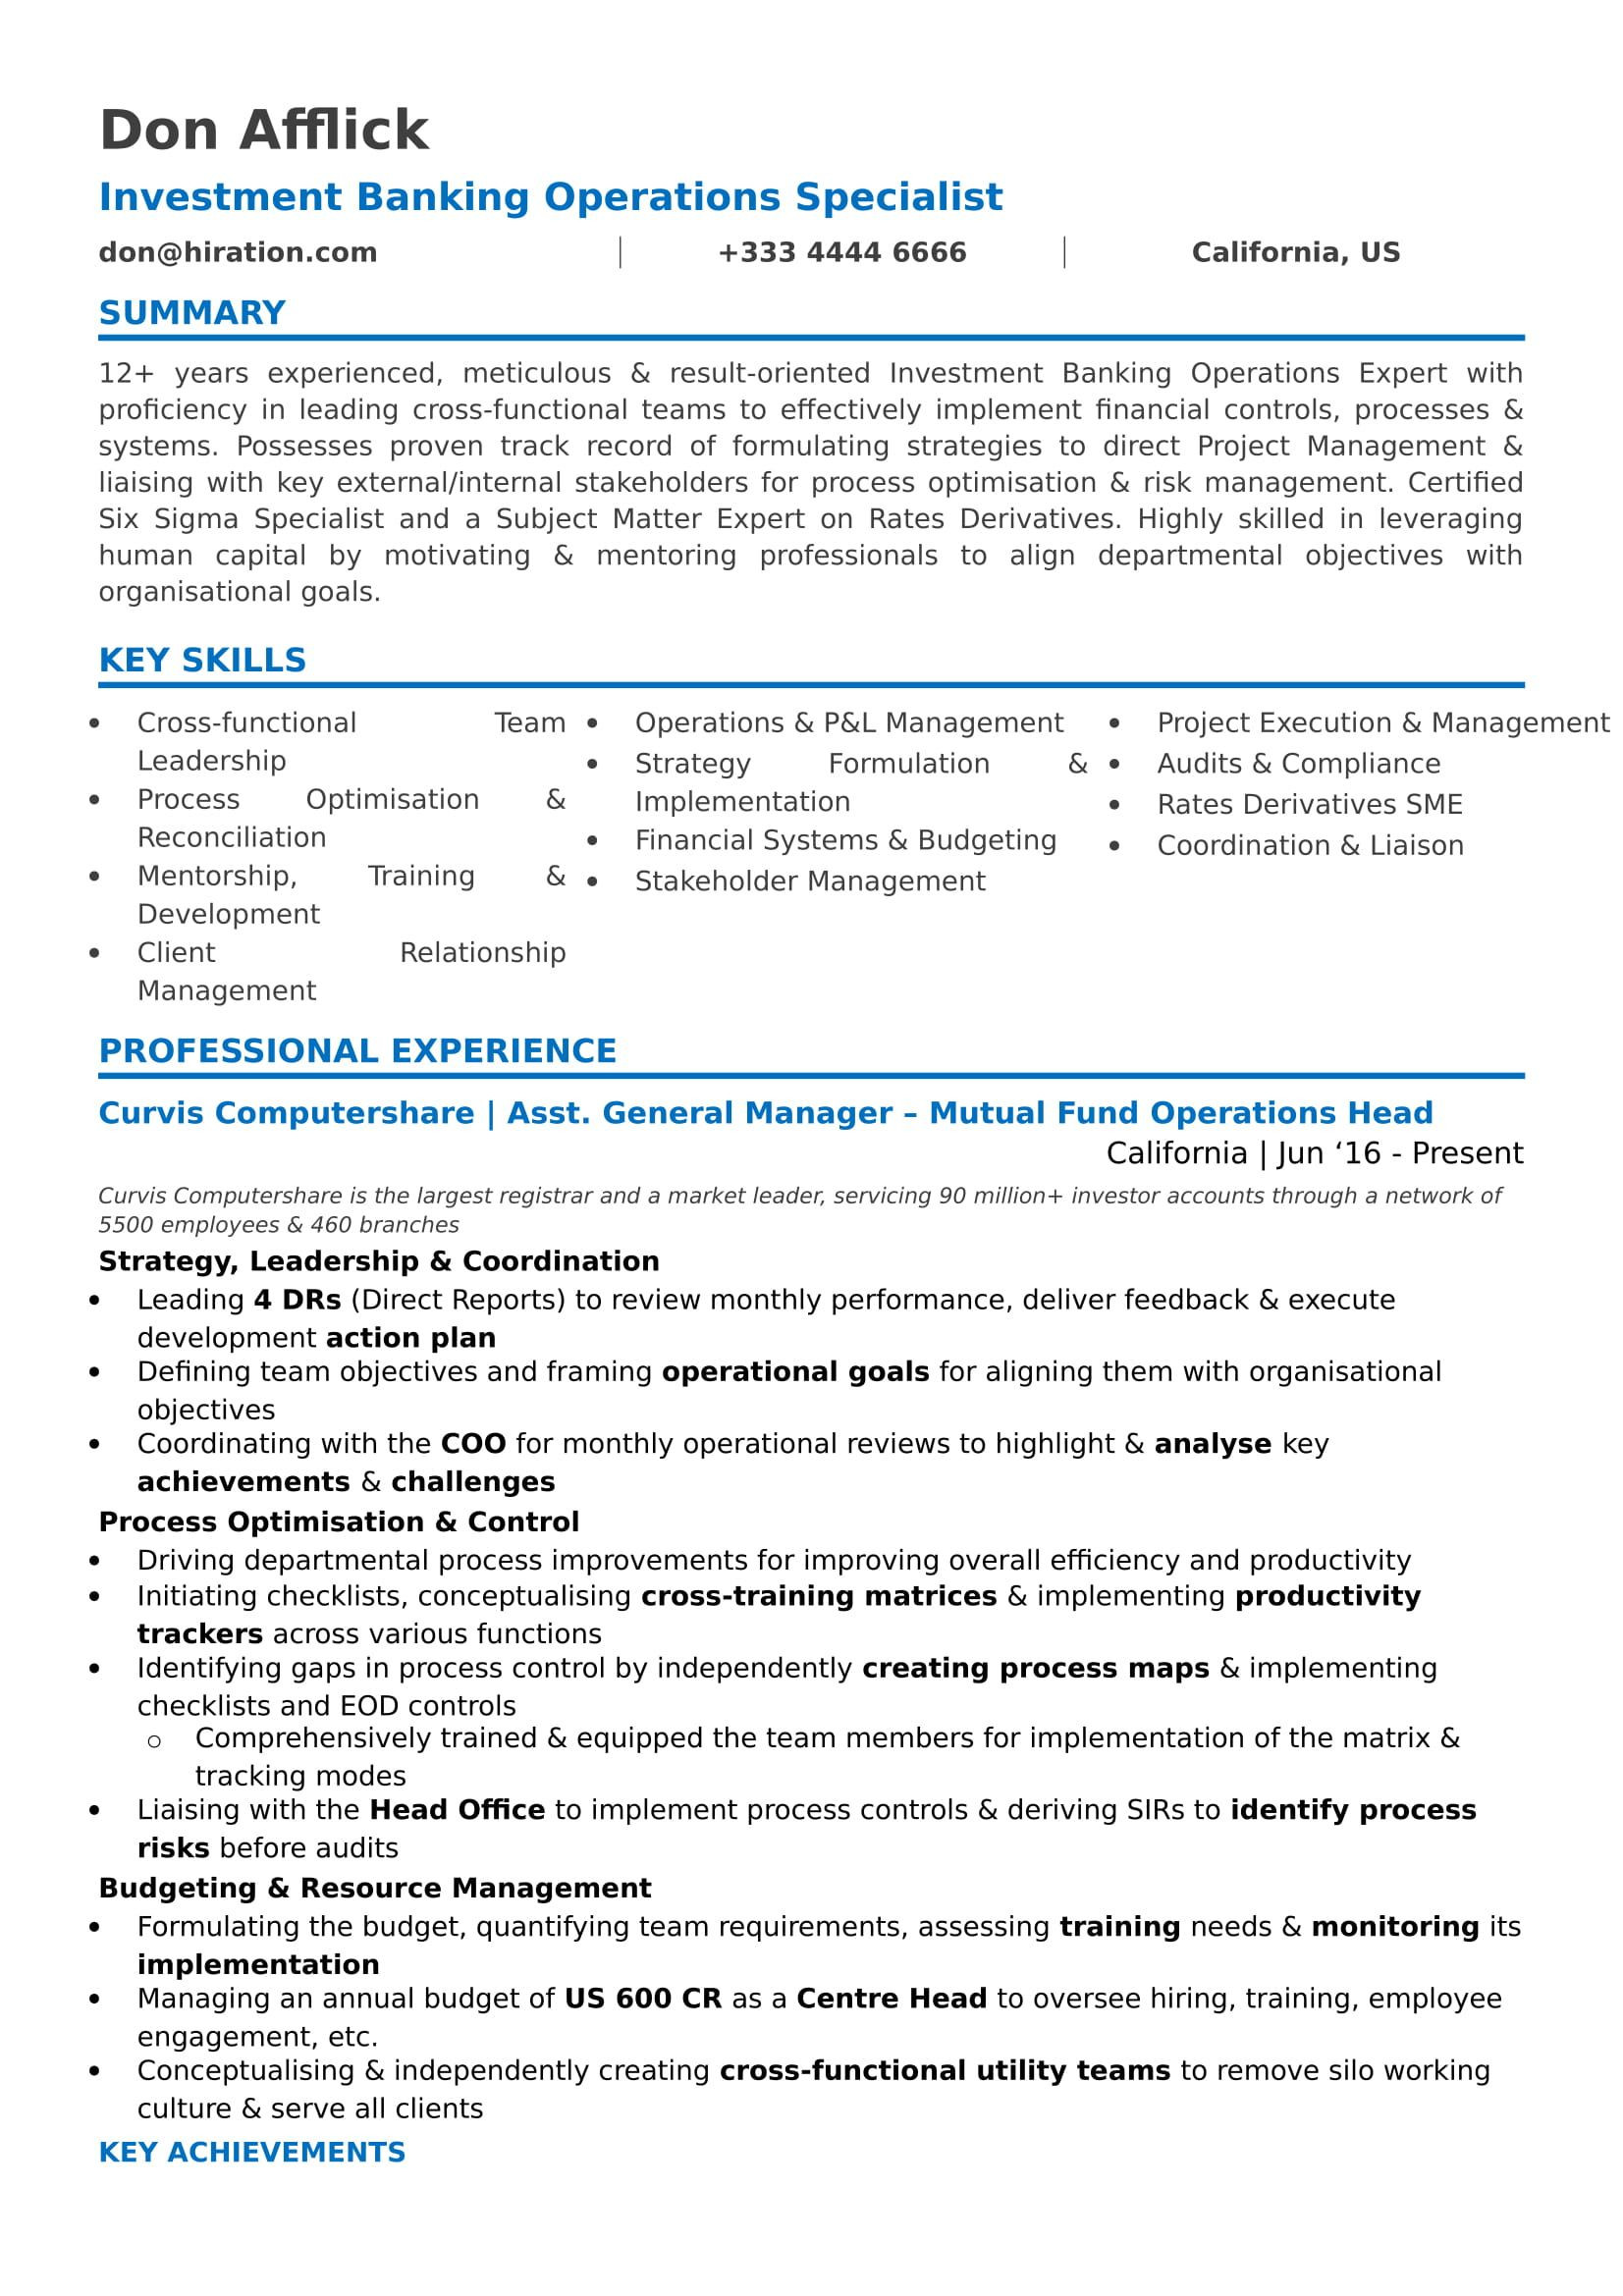 Transitioning Industries for Career Change Resume Objective Samples Career Change Resume: 2022 Guide to Resume for Career Change